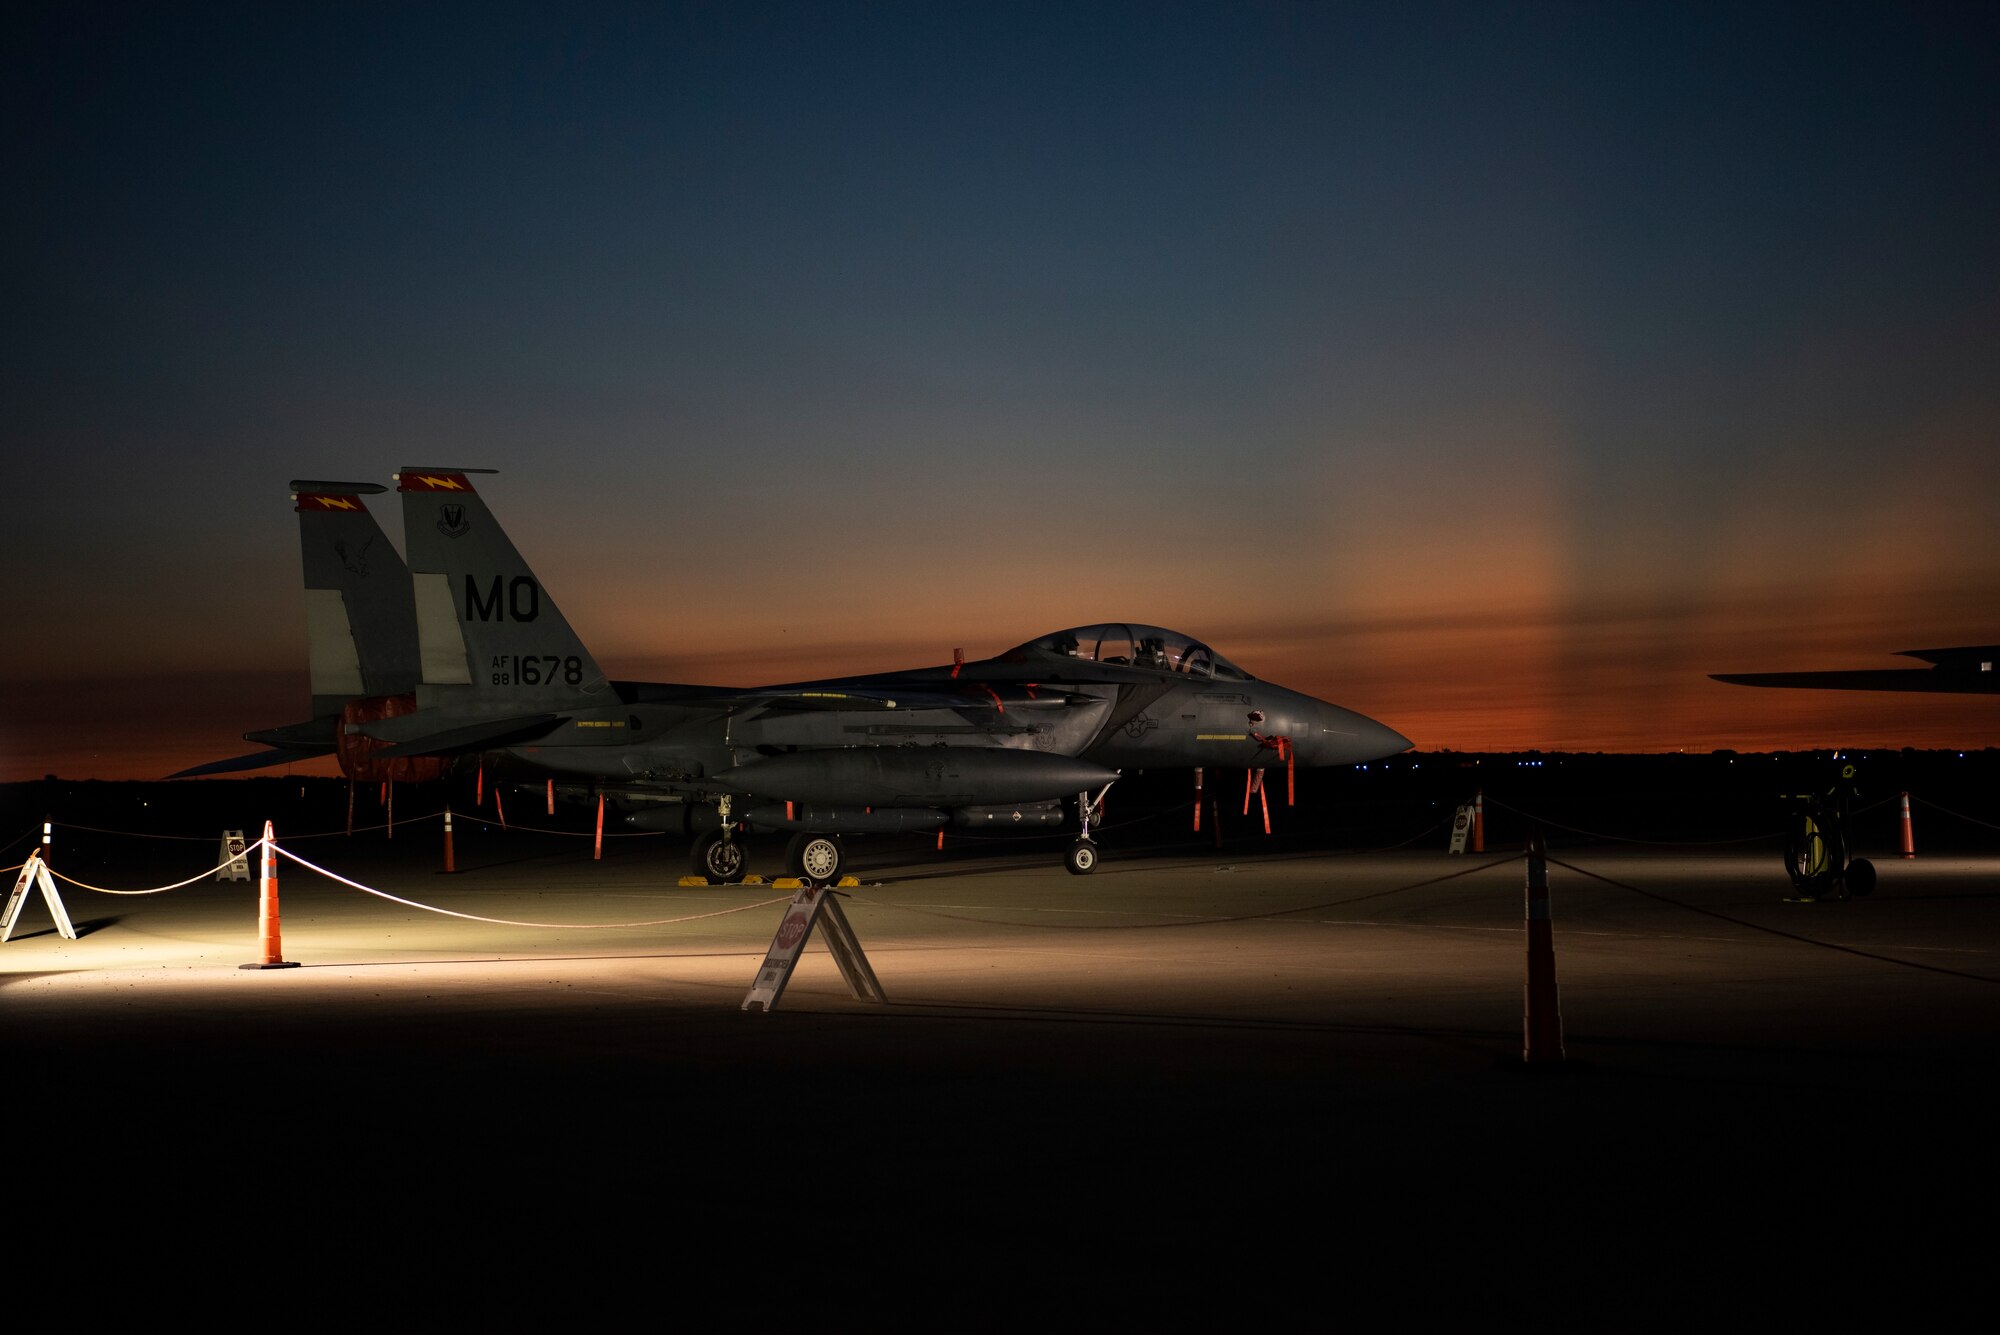 An F-15E Strike Eagle sits on the flightline at Laughlin Air Force Base, Texas, on Sept. 23, 2020. Two teams of pilots flying the F-15E visited Laughlin from Mountain Home Air Force Base, Idaho, to talk with student pilots, first assignment instructor pilots and leaders on the aircrafts’ capabilities as well as increase interaction within the fighter pilot community. (U.S. Air Force photo by Senior Airman Marco A. Gomez)